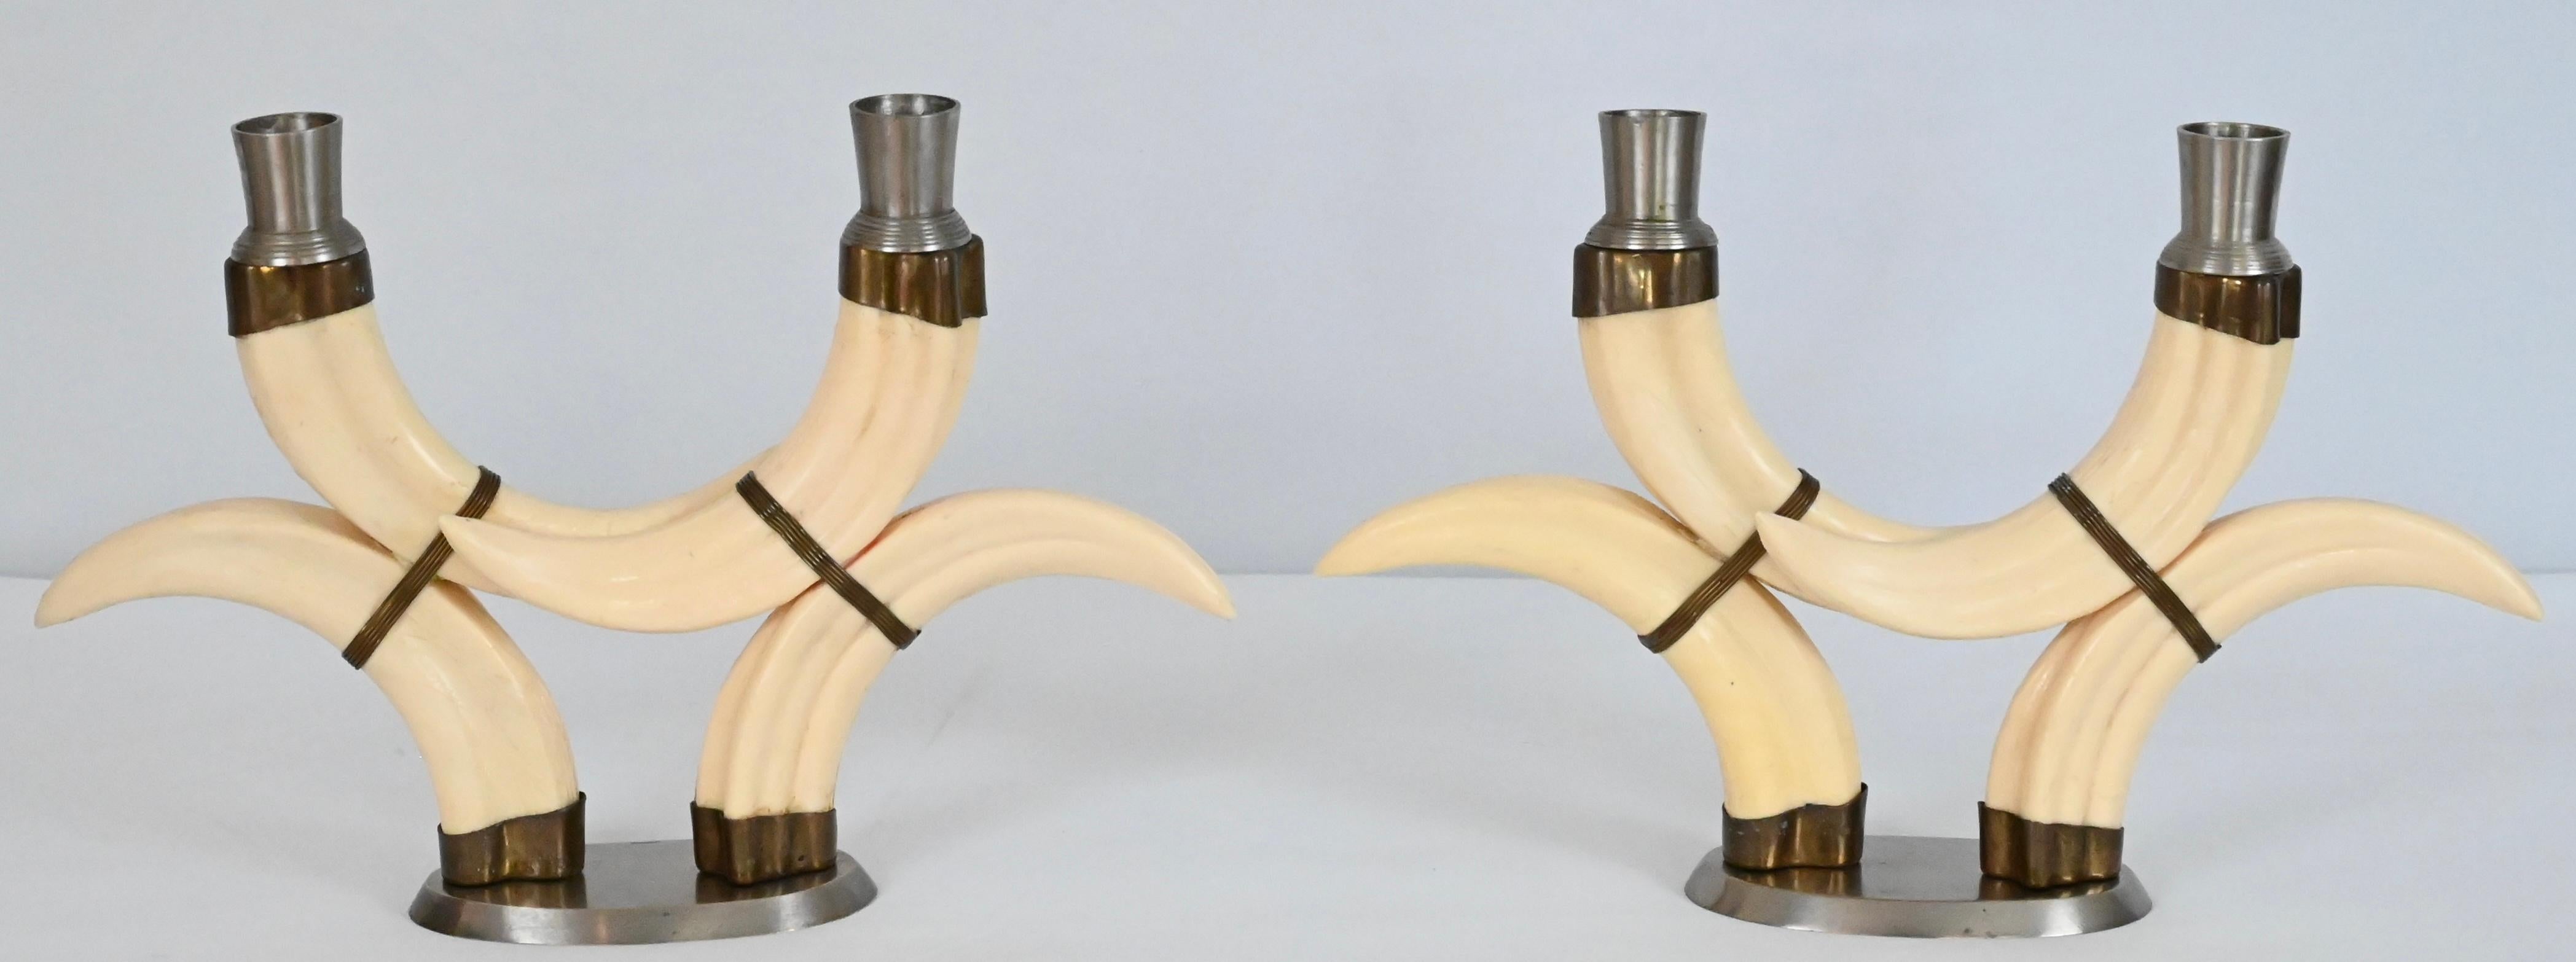 Pair of Beige Faux Horn Candlesticks Mounted in Nickel For Sale 1